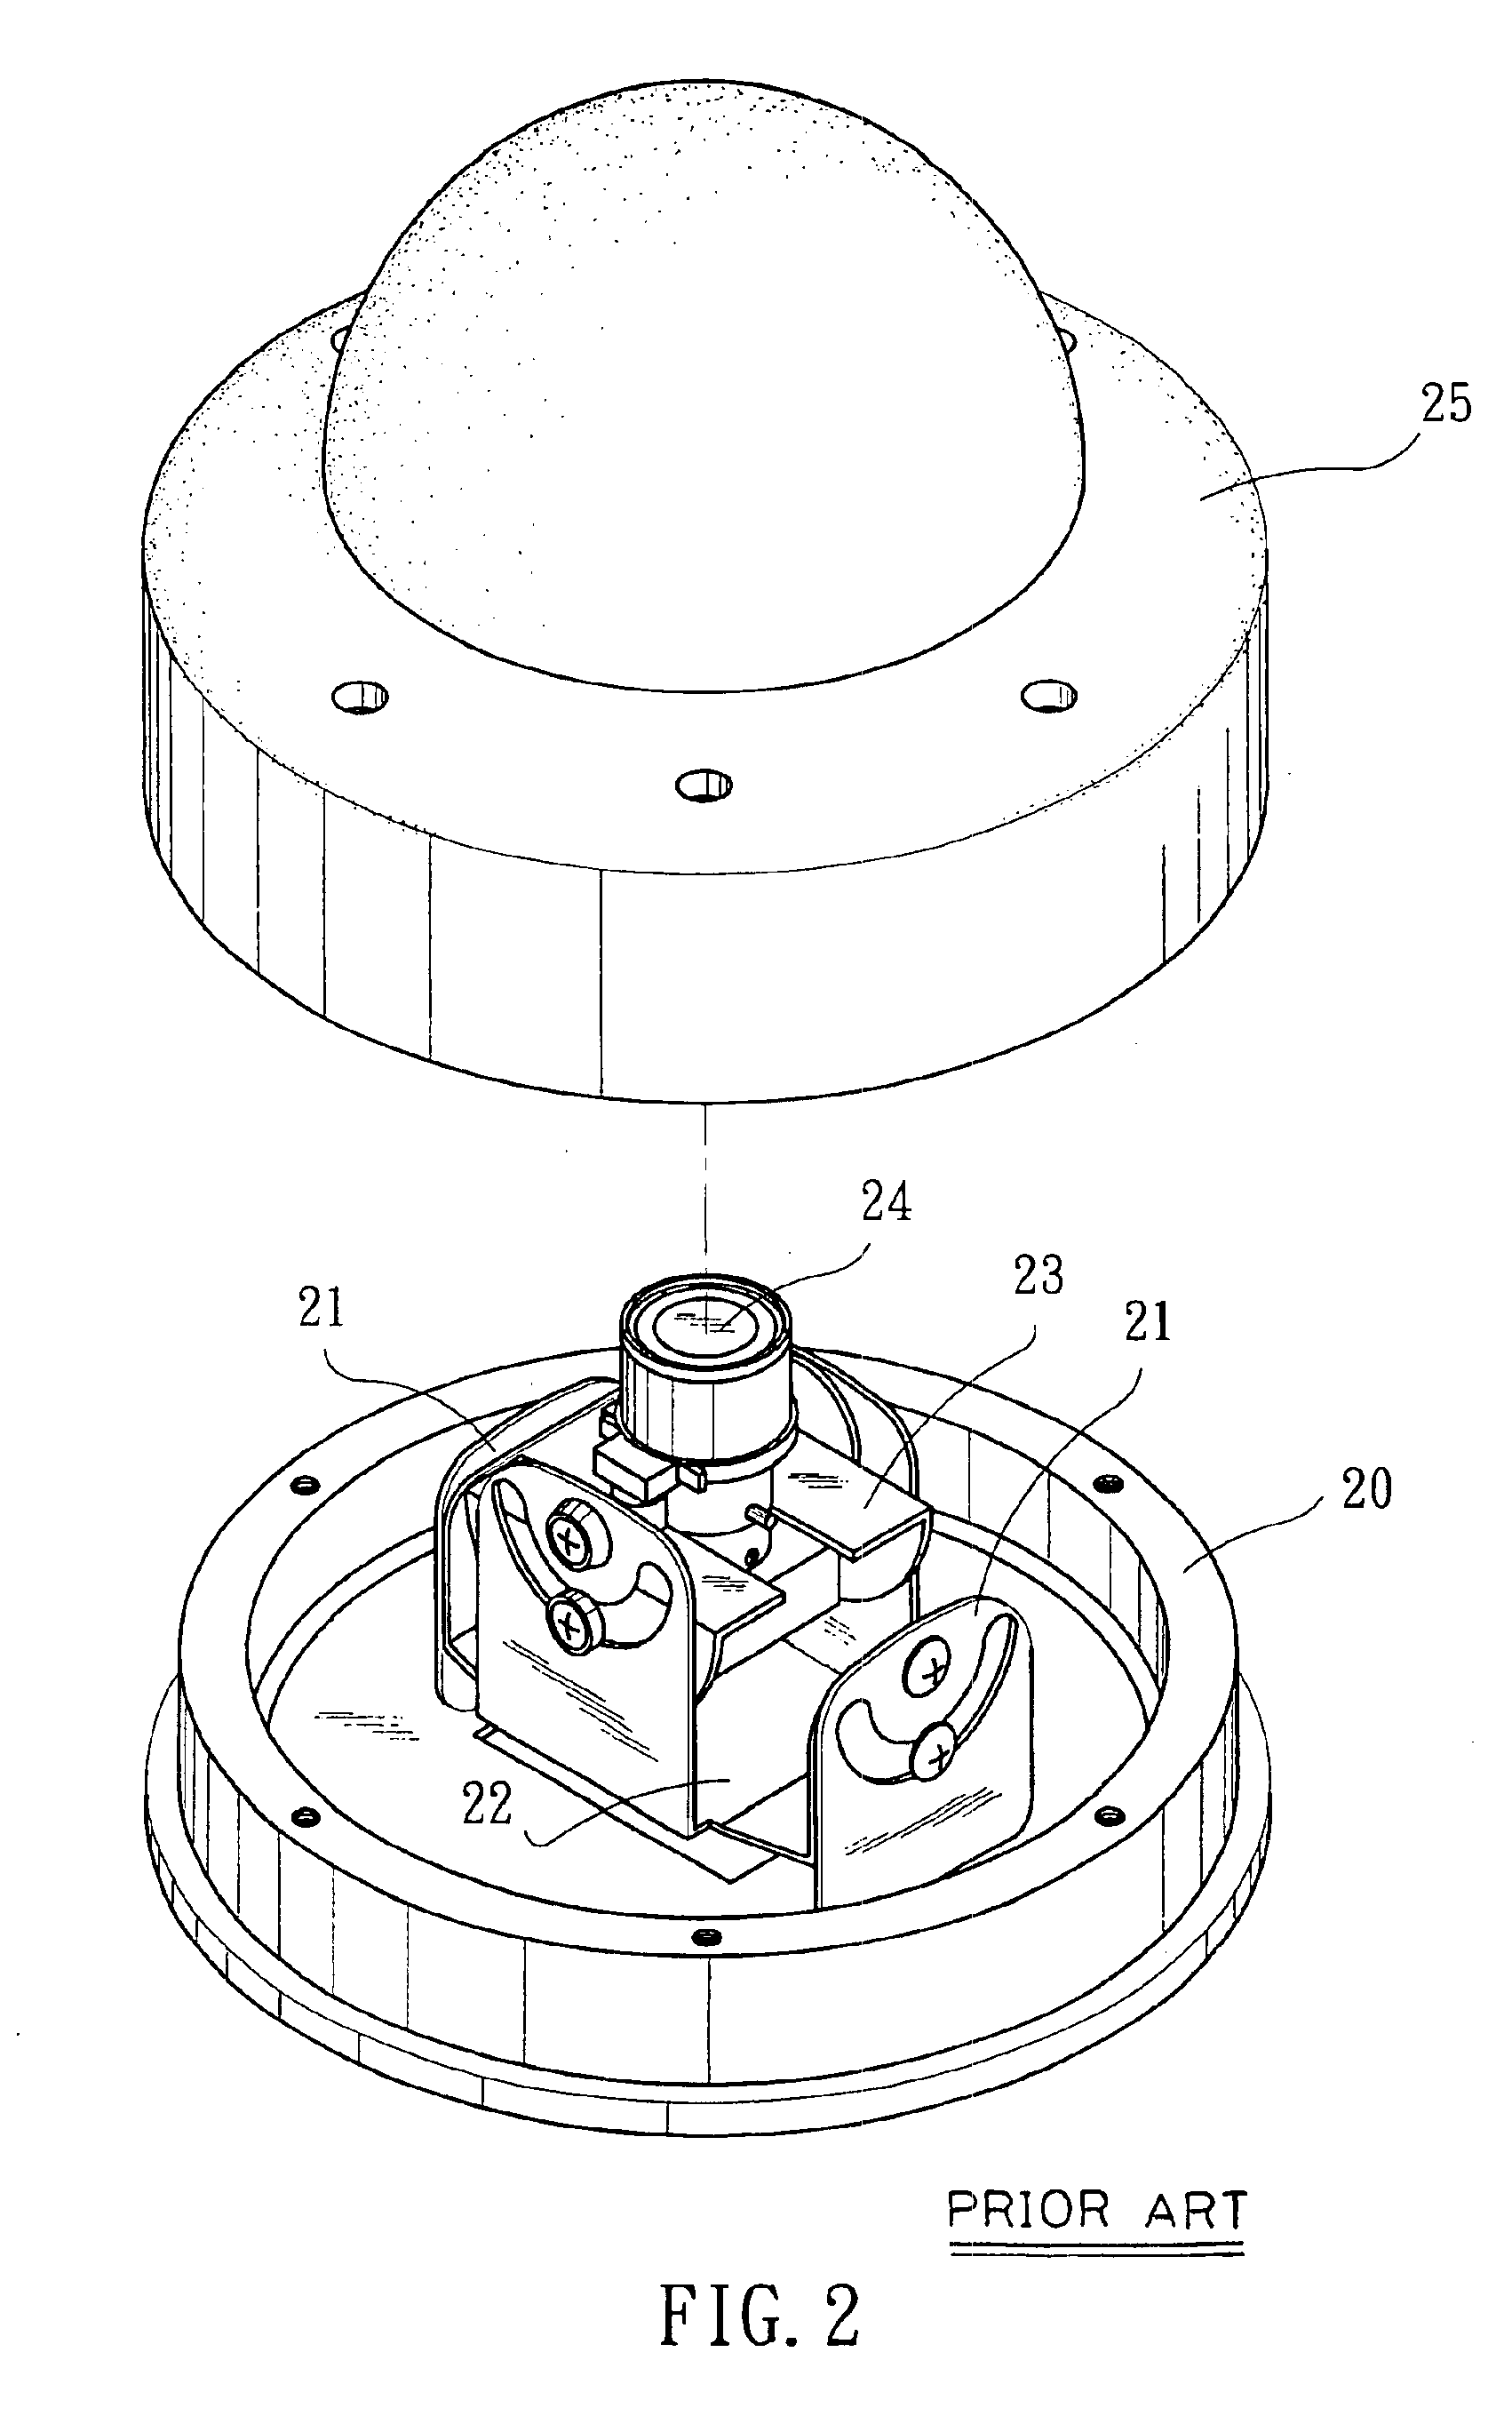 Lens holding structure for wall-mounted surveillance camera